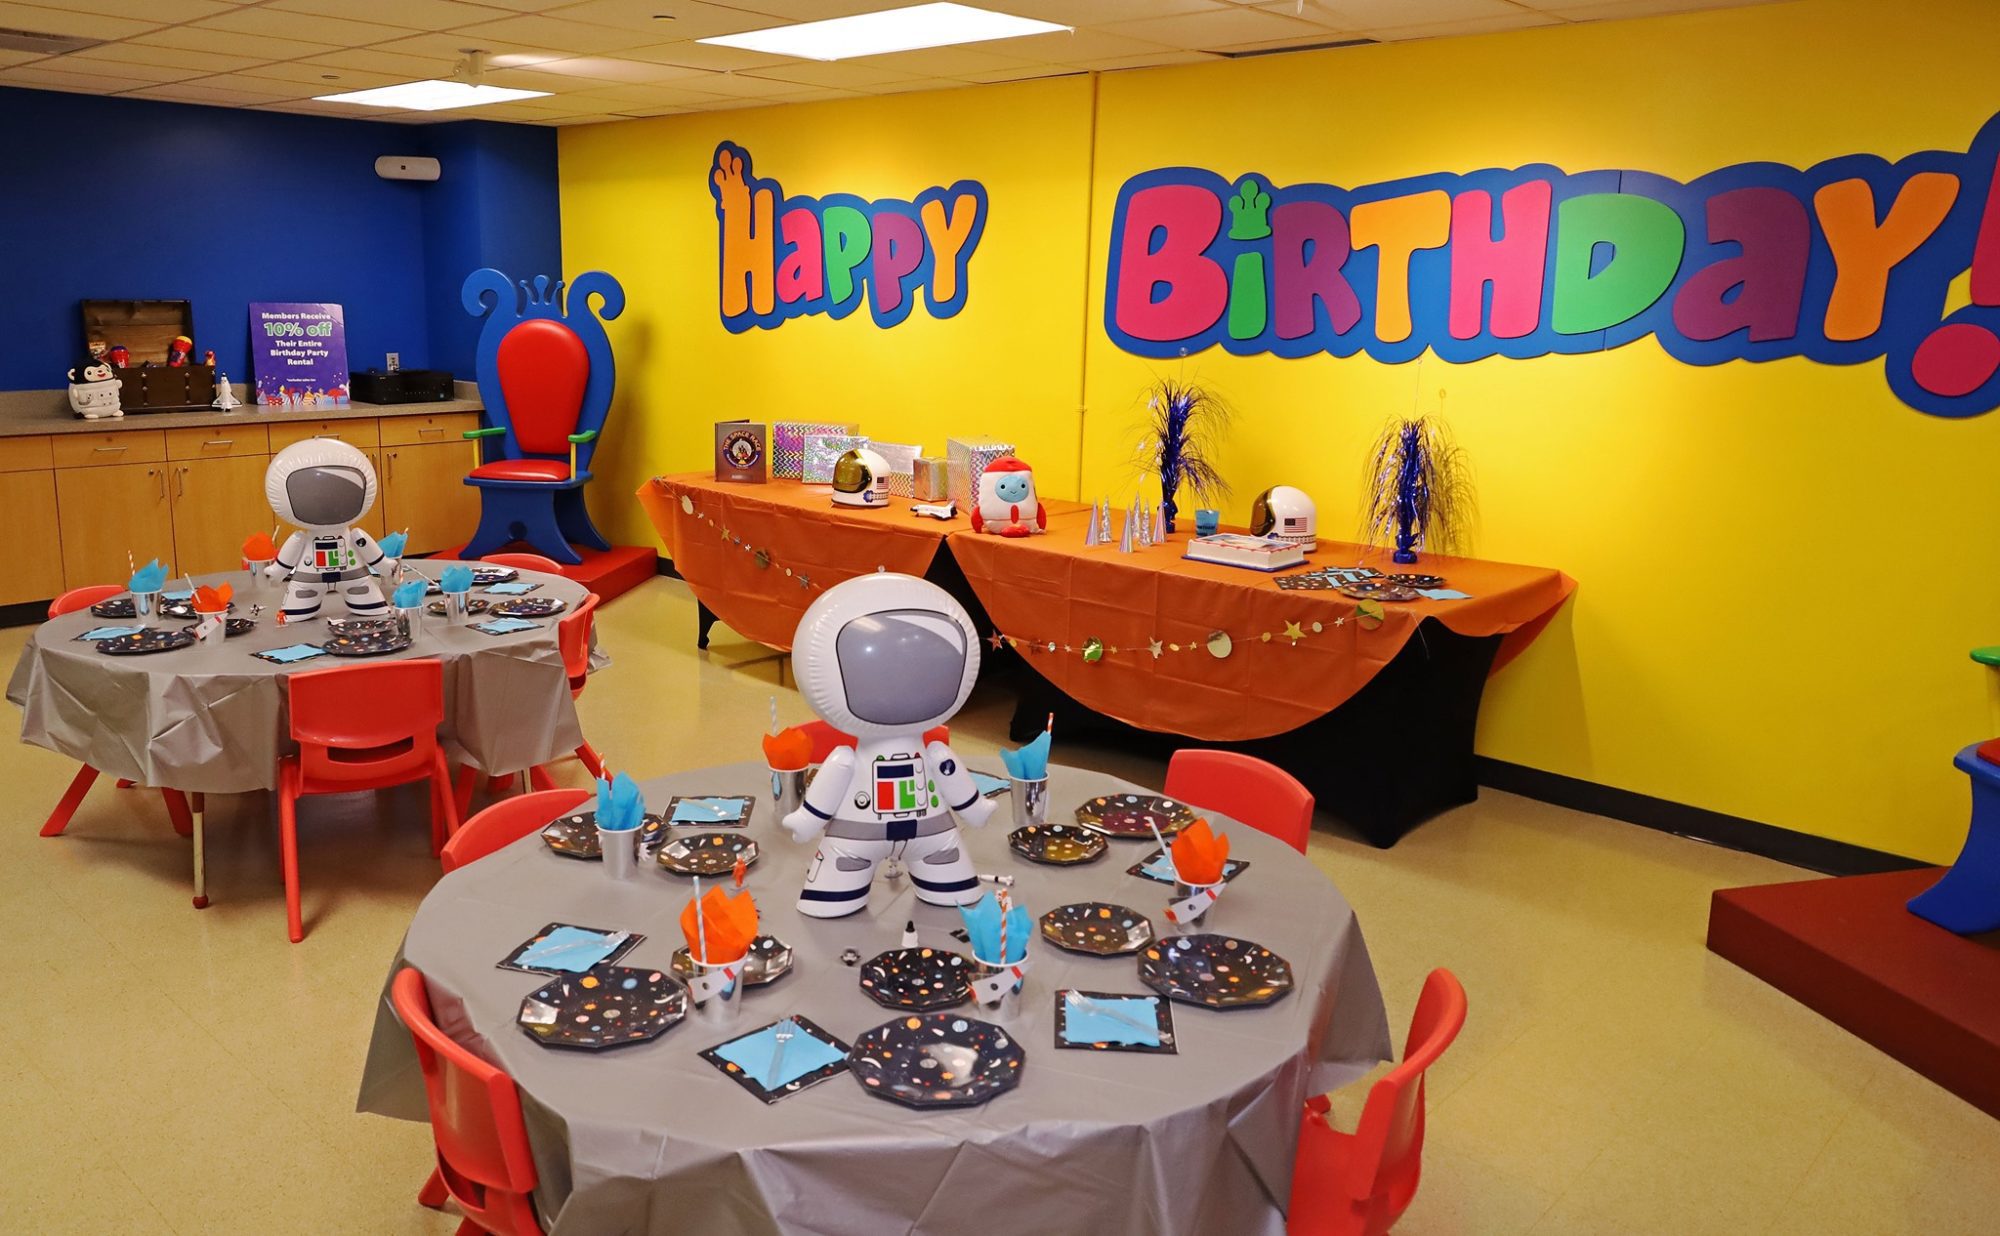 Birthday Parties at The Children's Museum of Indianapolis - Indy's Child Magazine